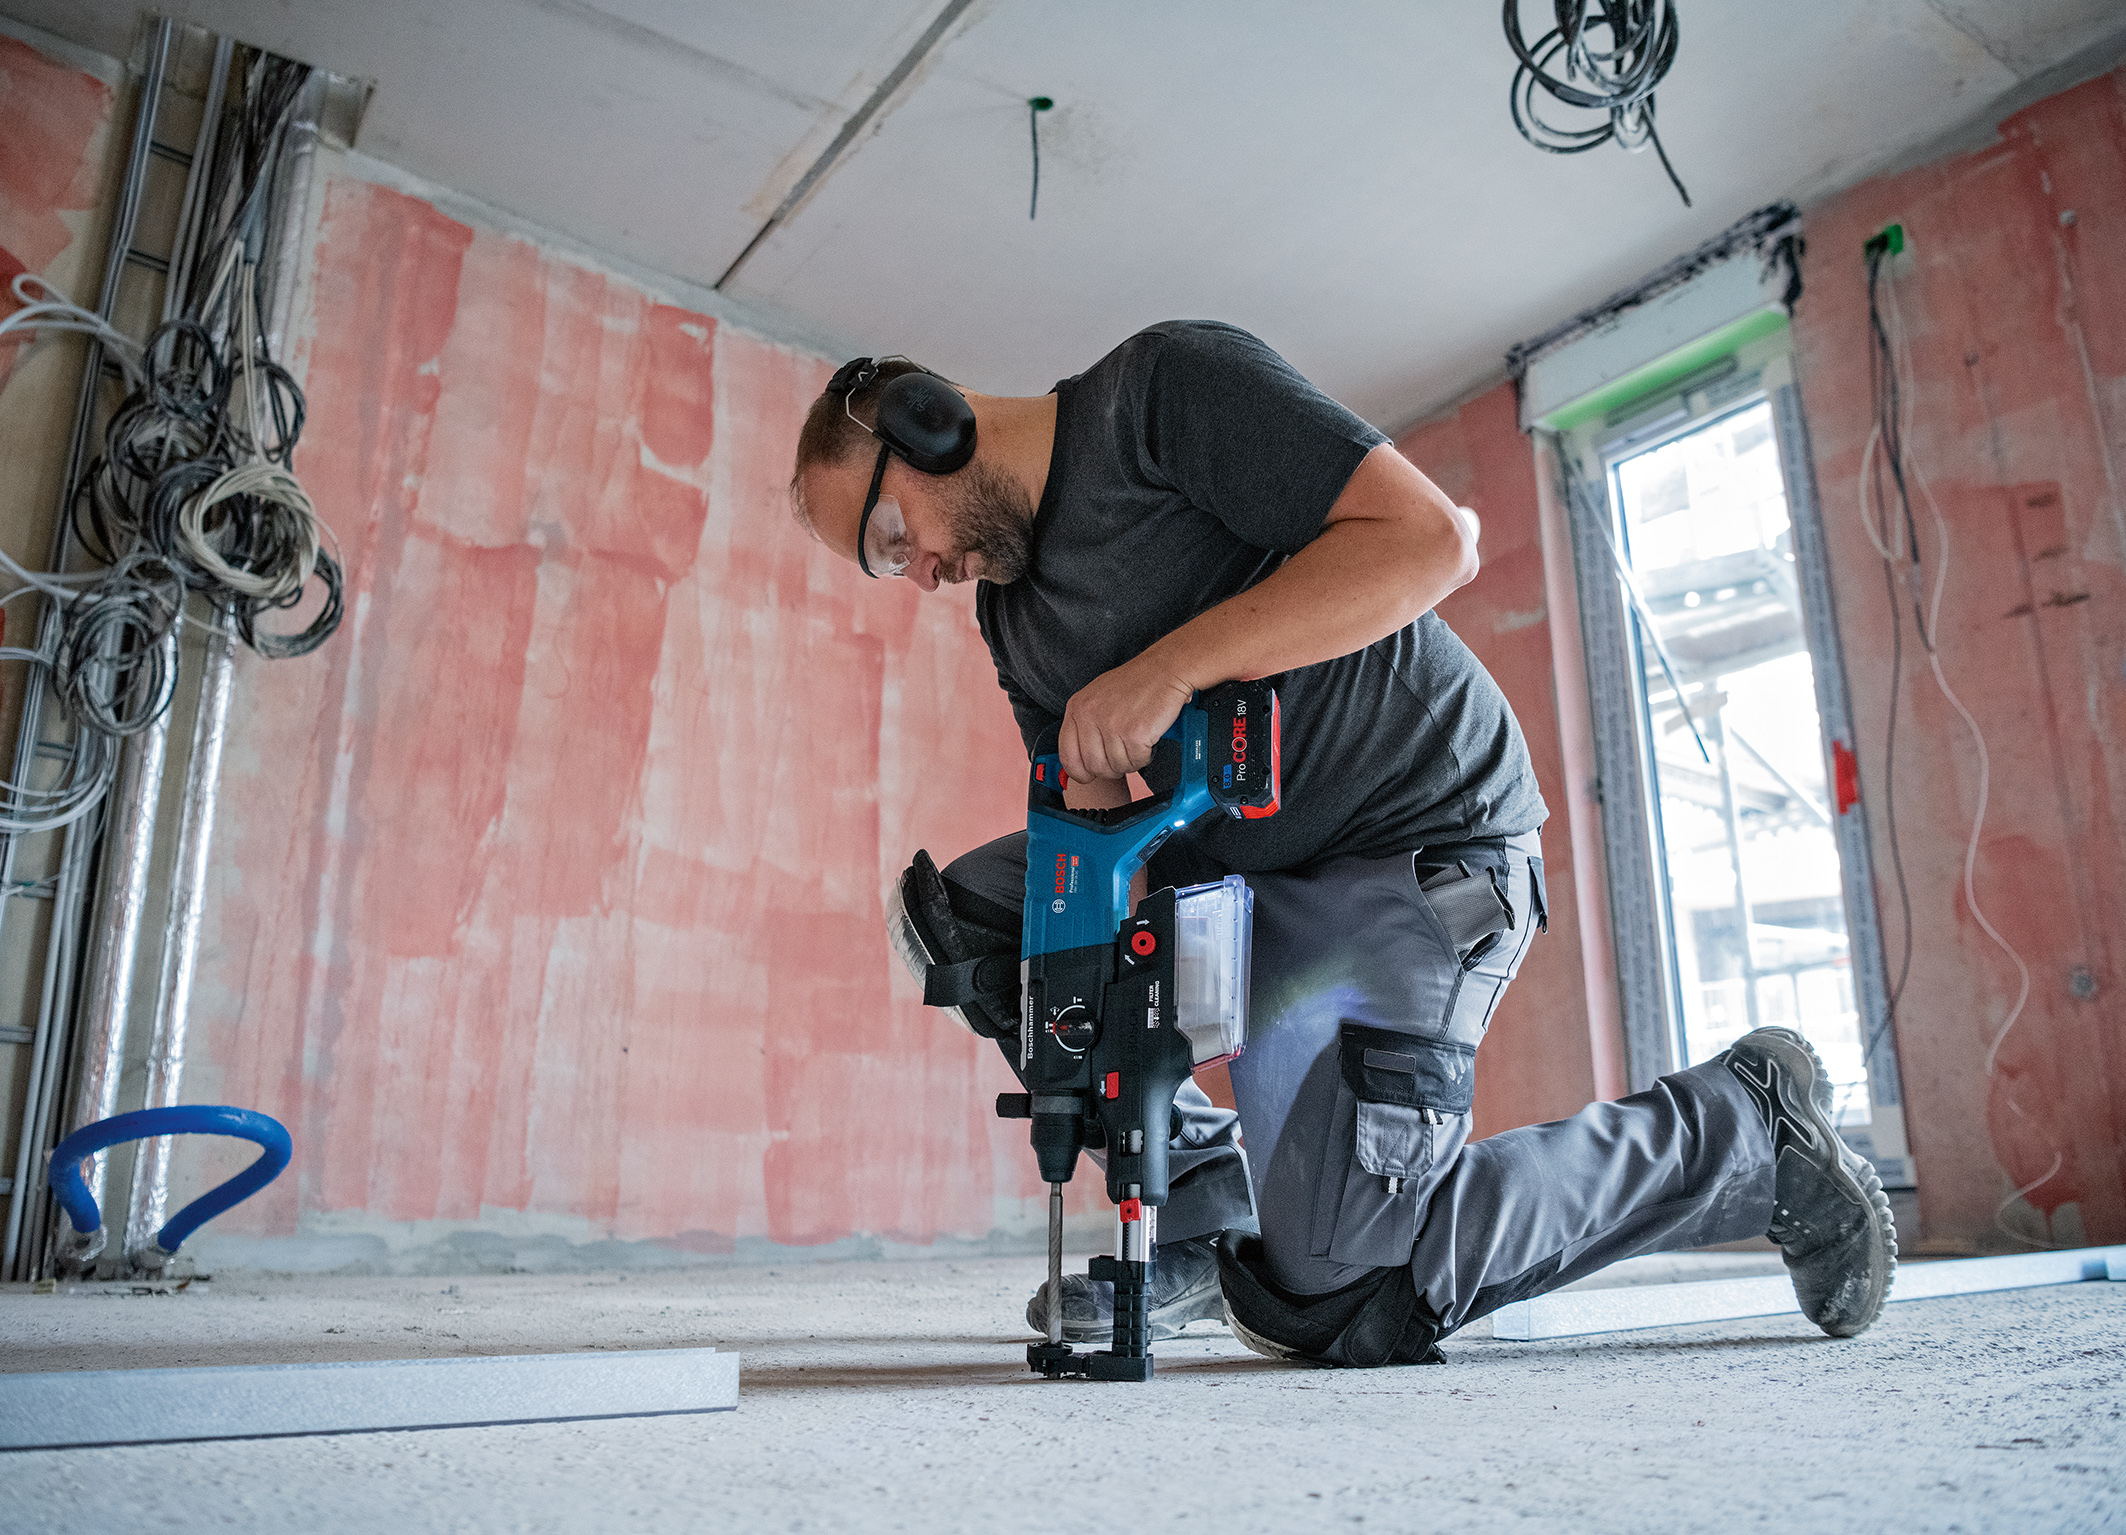 More powerful than its corded counterpart: GBH 18V-28 DC Professional 18V  rotary hammer - Bosch Media Service